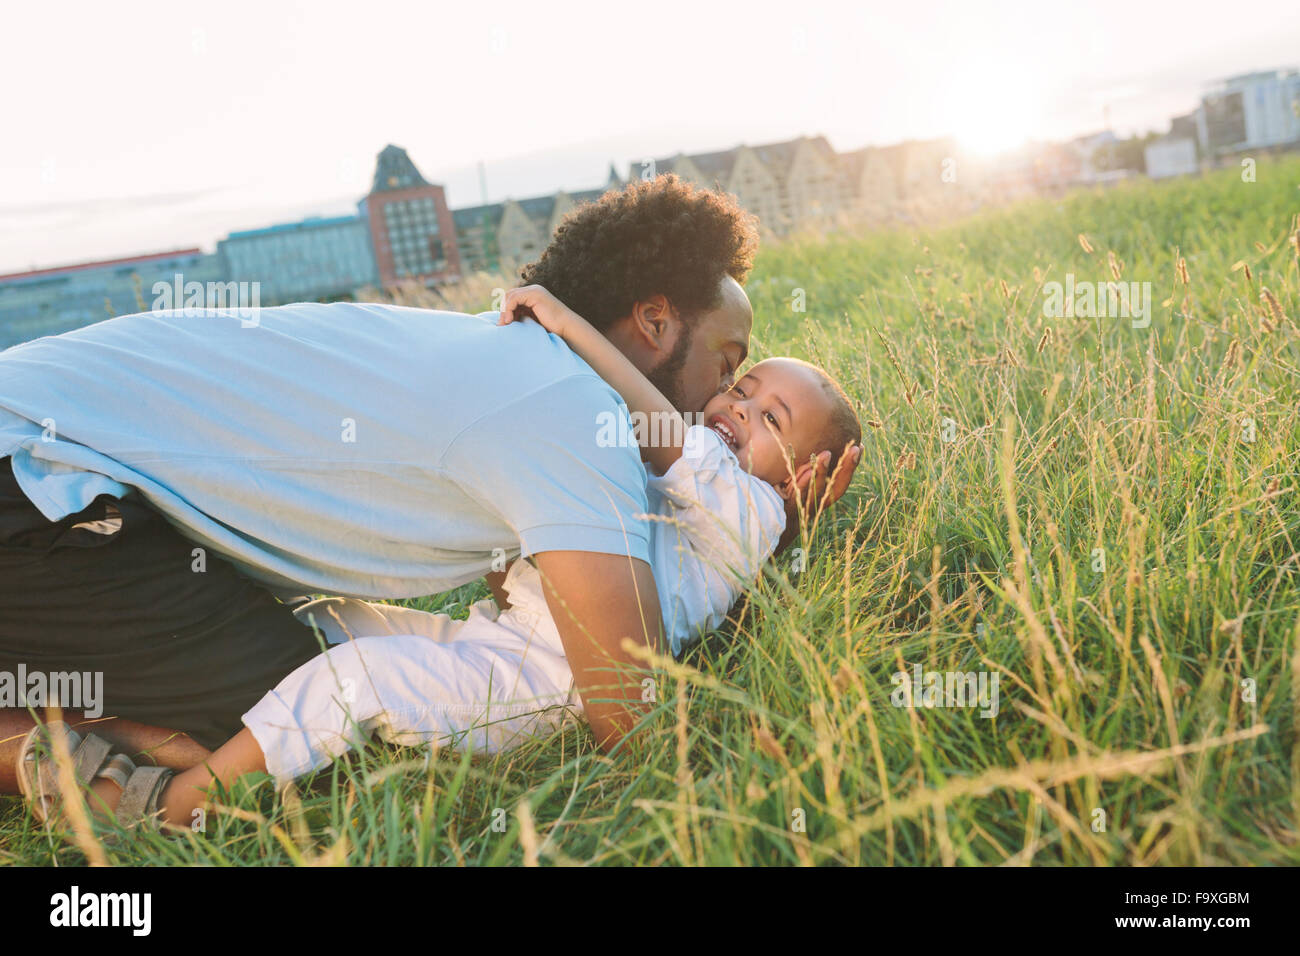 Germany, Cologne, playful father with son in field Stock Photo